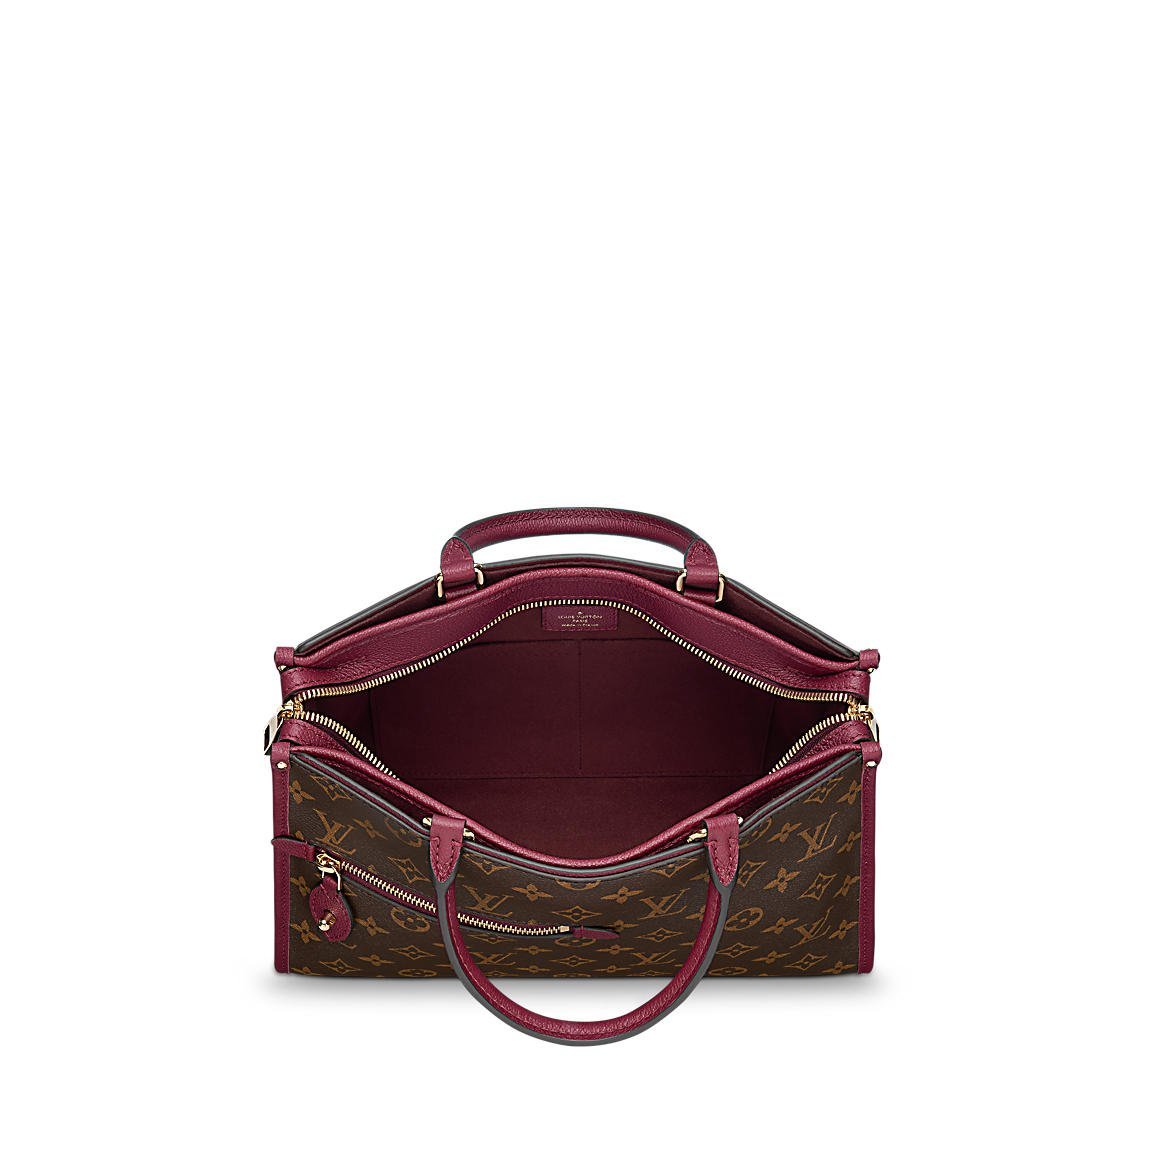 New at LV: The Louis Vuitton Popincourt Tote - PurseBop